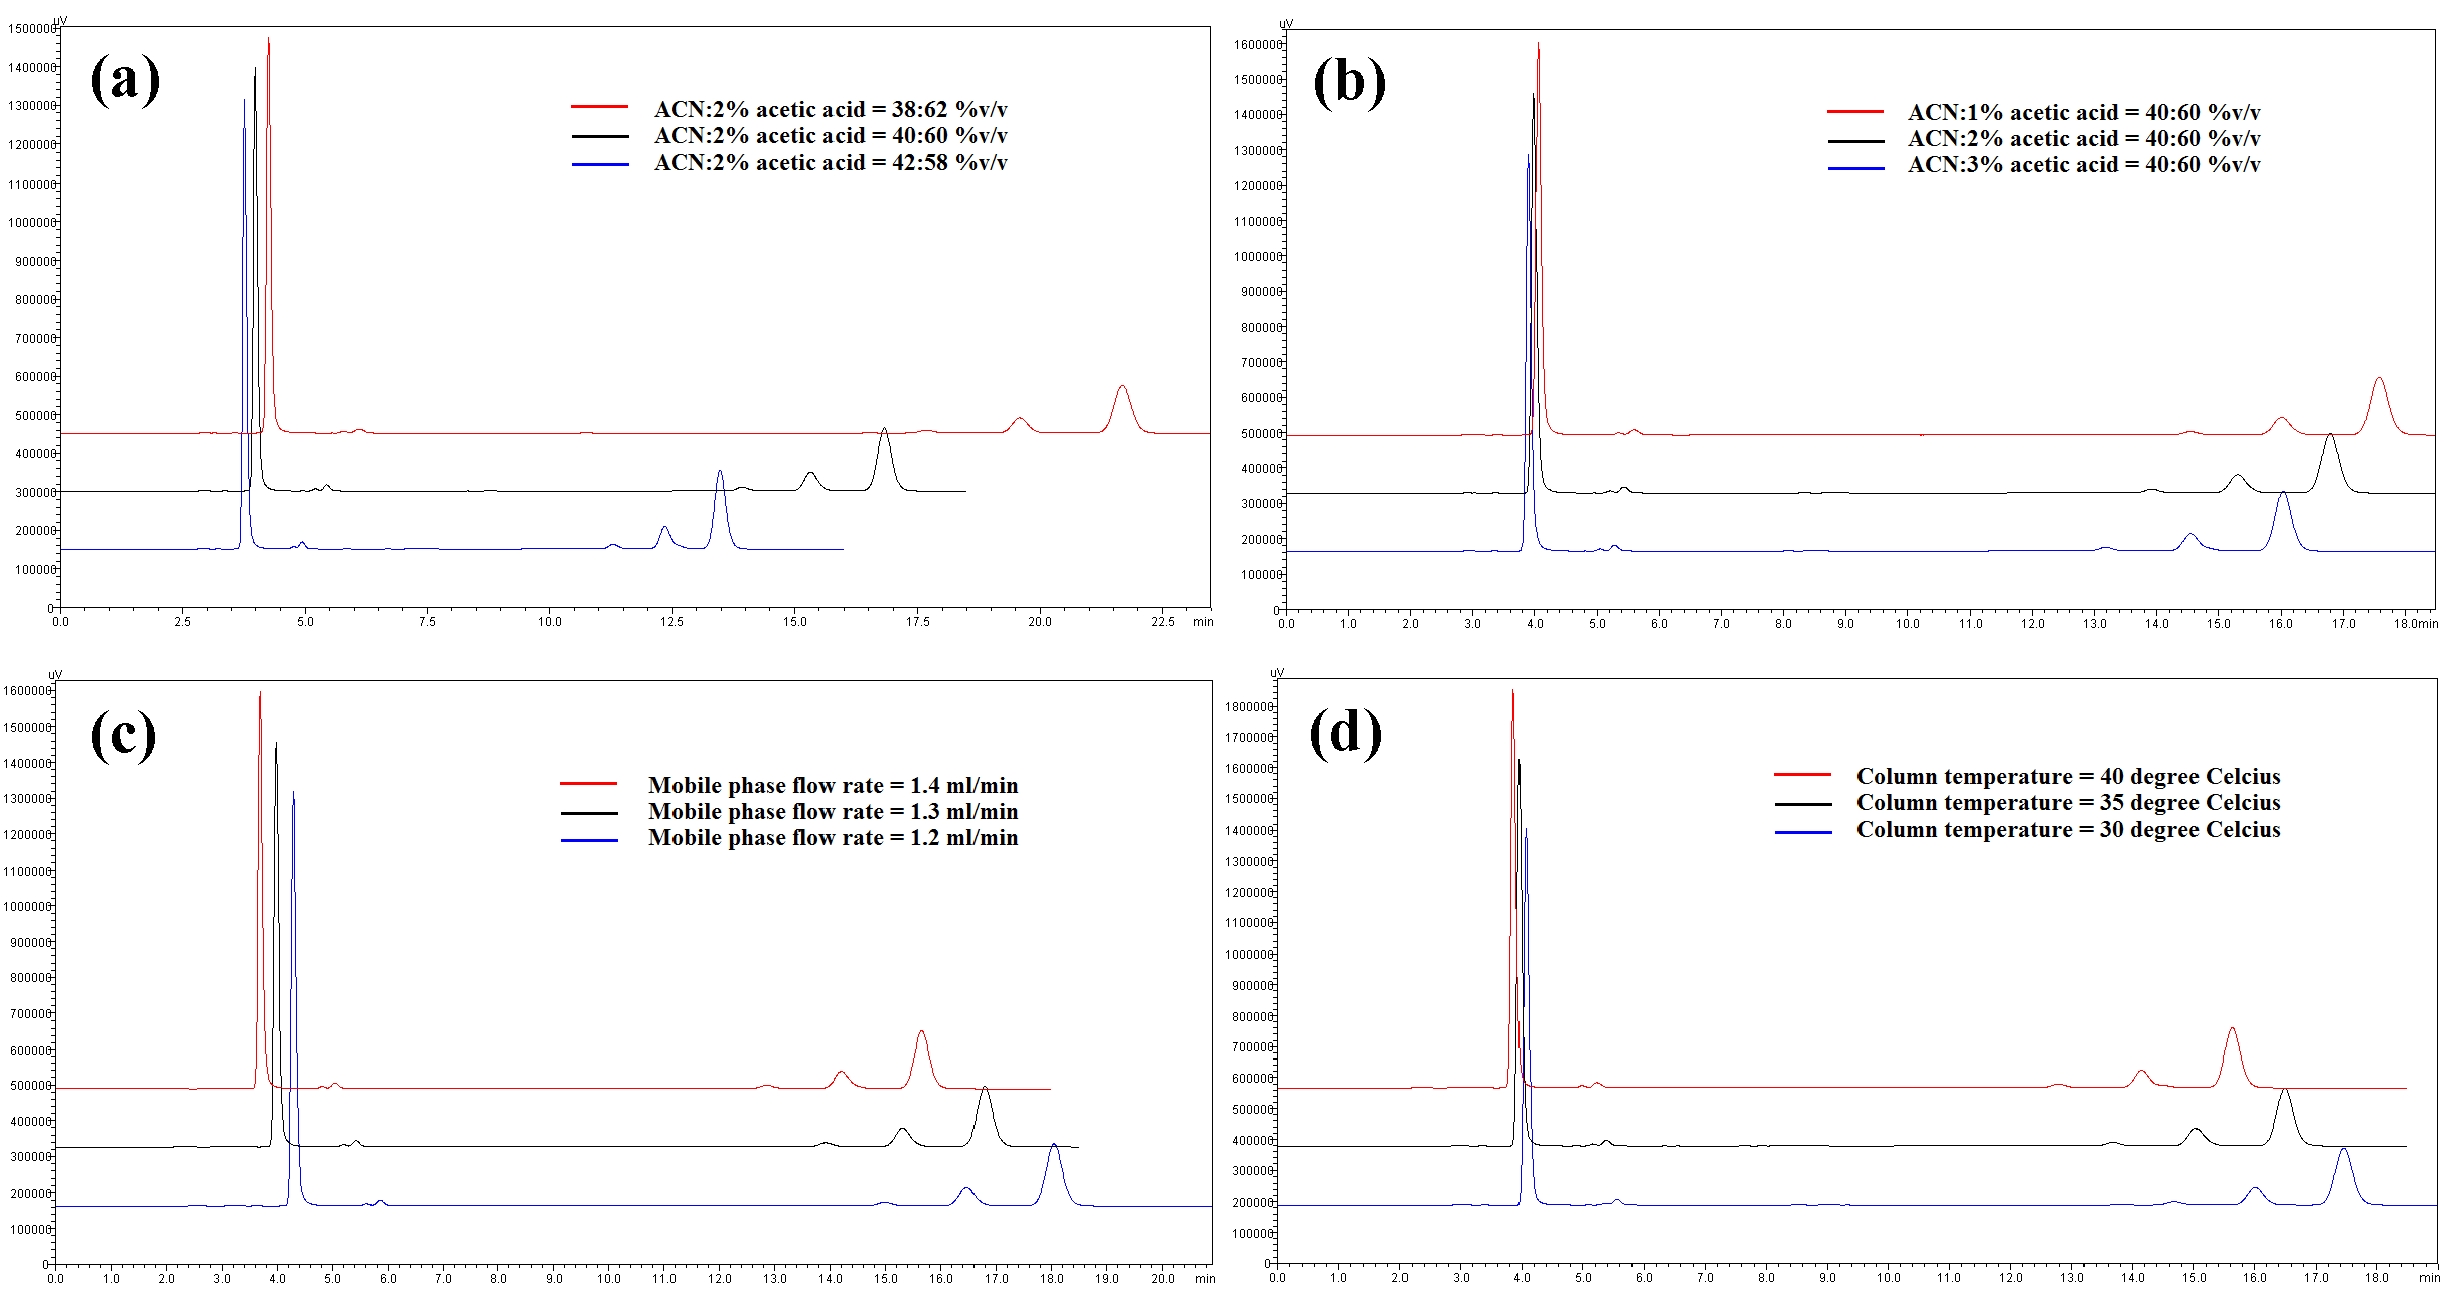 Combined chromatograms of quercetin (QUE), bisdemethoxycurcumin (BMDC), demethoxycurcumin (DMC), curcumin (CUR) analyzed at different conditions: (a) acetonitrile: 2% acetic acid at a flow rate of 1.3 mL/minutes, 35°C (b) acetonitrile: different acetic acid concentrations (40% : 60% v/v) at a flow rate of 1.3 mL/min, 35°C (c) acetonitrile: 2% acetic acid (40% : 60% v/v) at different flow rates, 35°C (d) acetonitrile: 2% acetic acid (40% : 60% v/v) at a flow rate of 1.3 mL/min at different temperatures.